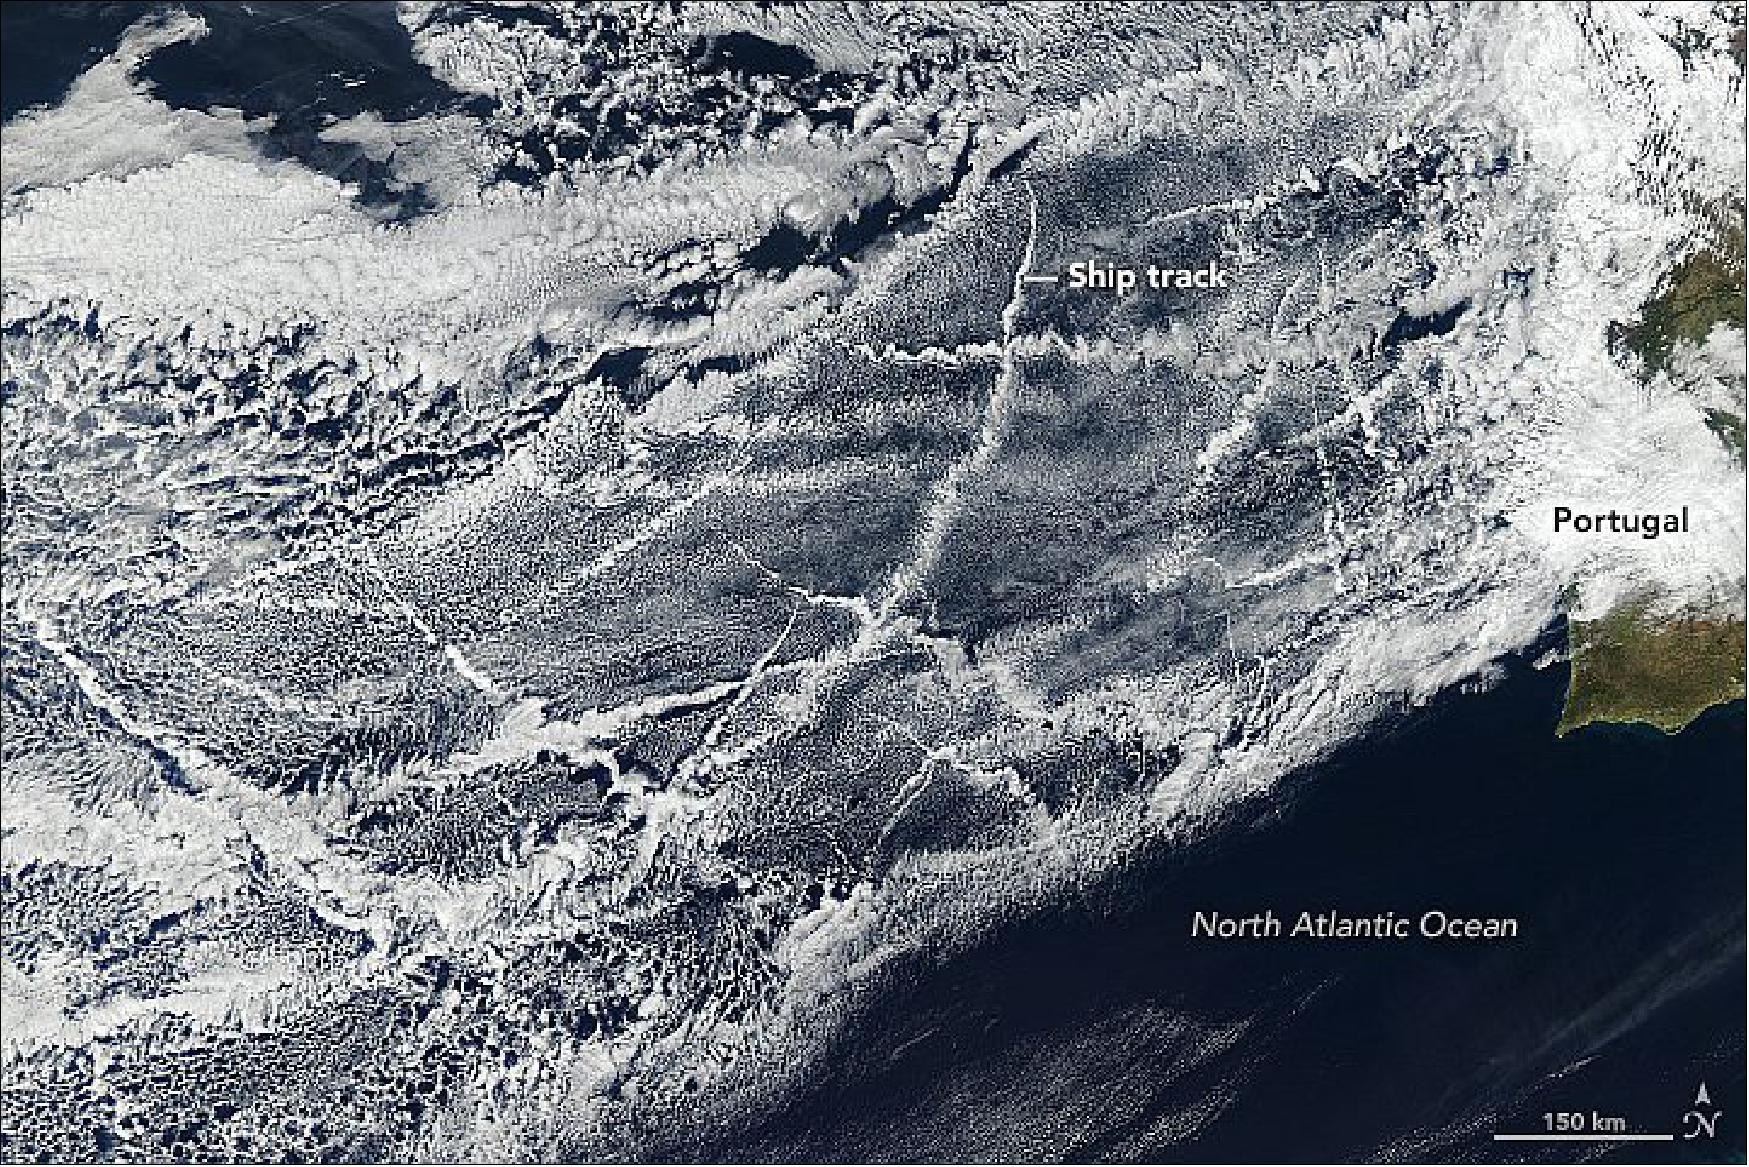 Figure 75: The natural-color image shows an example of ship tracks over the southeast Atlantic Ocean as observed on January 18, 2018, by the Moderate Resolution Imaging Spectroradiometer (MODIS) on NASA's Aqua satellite (image credit: NASA Earth Observatory, image by Lauren Dauphin using MODIS image by Jeff Schmaltz, LANCE/EOSDIS Rapid Response. Story by Kasha Patel)